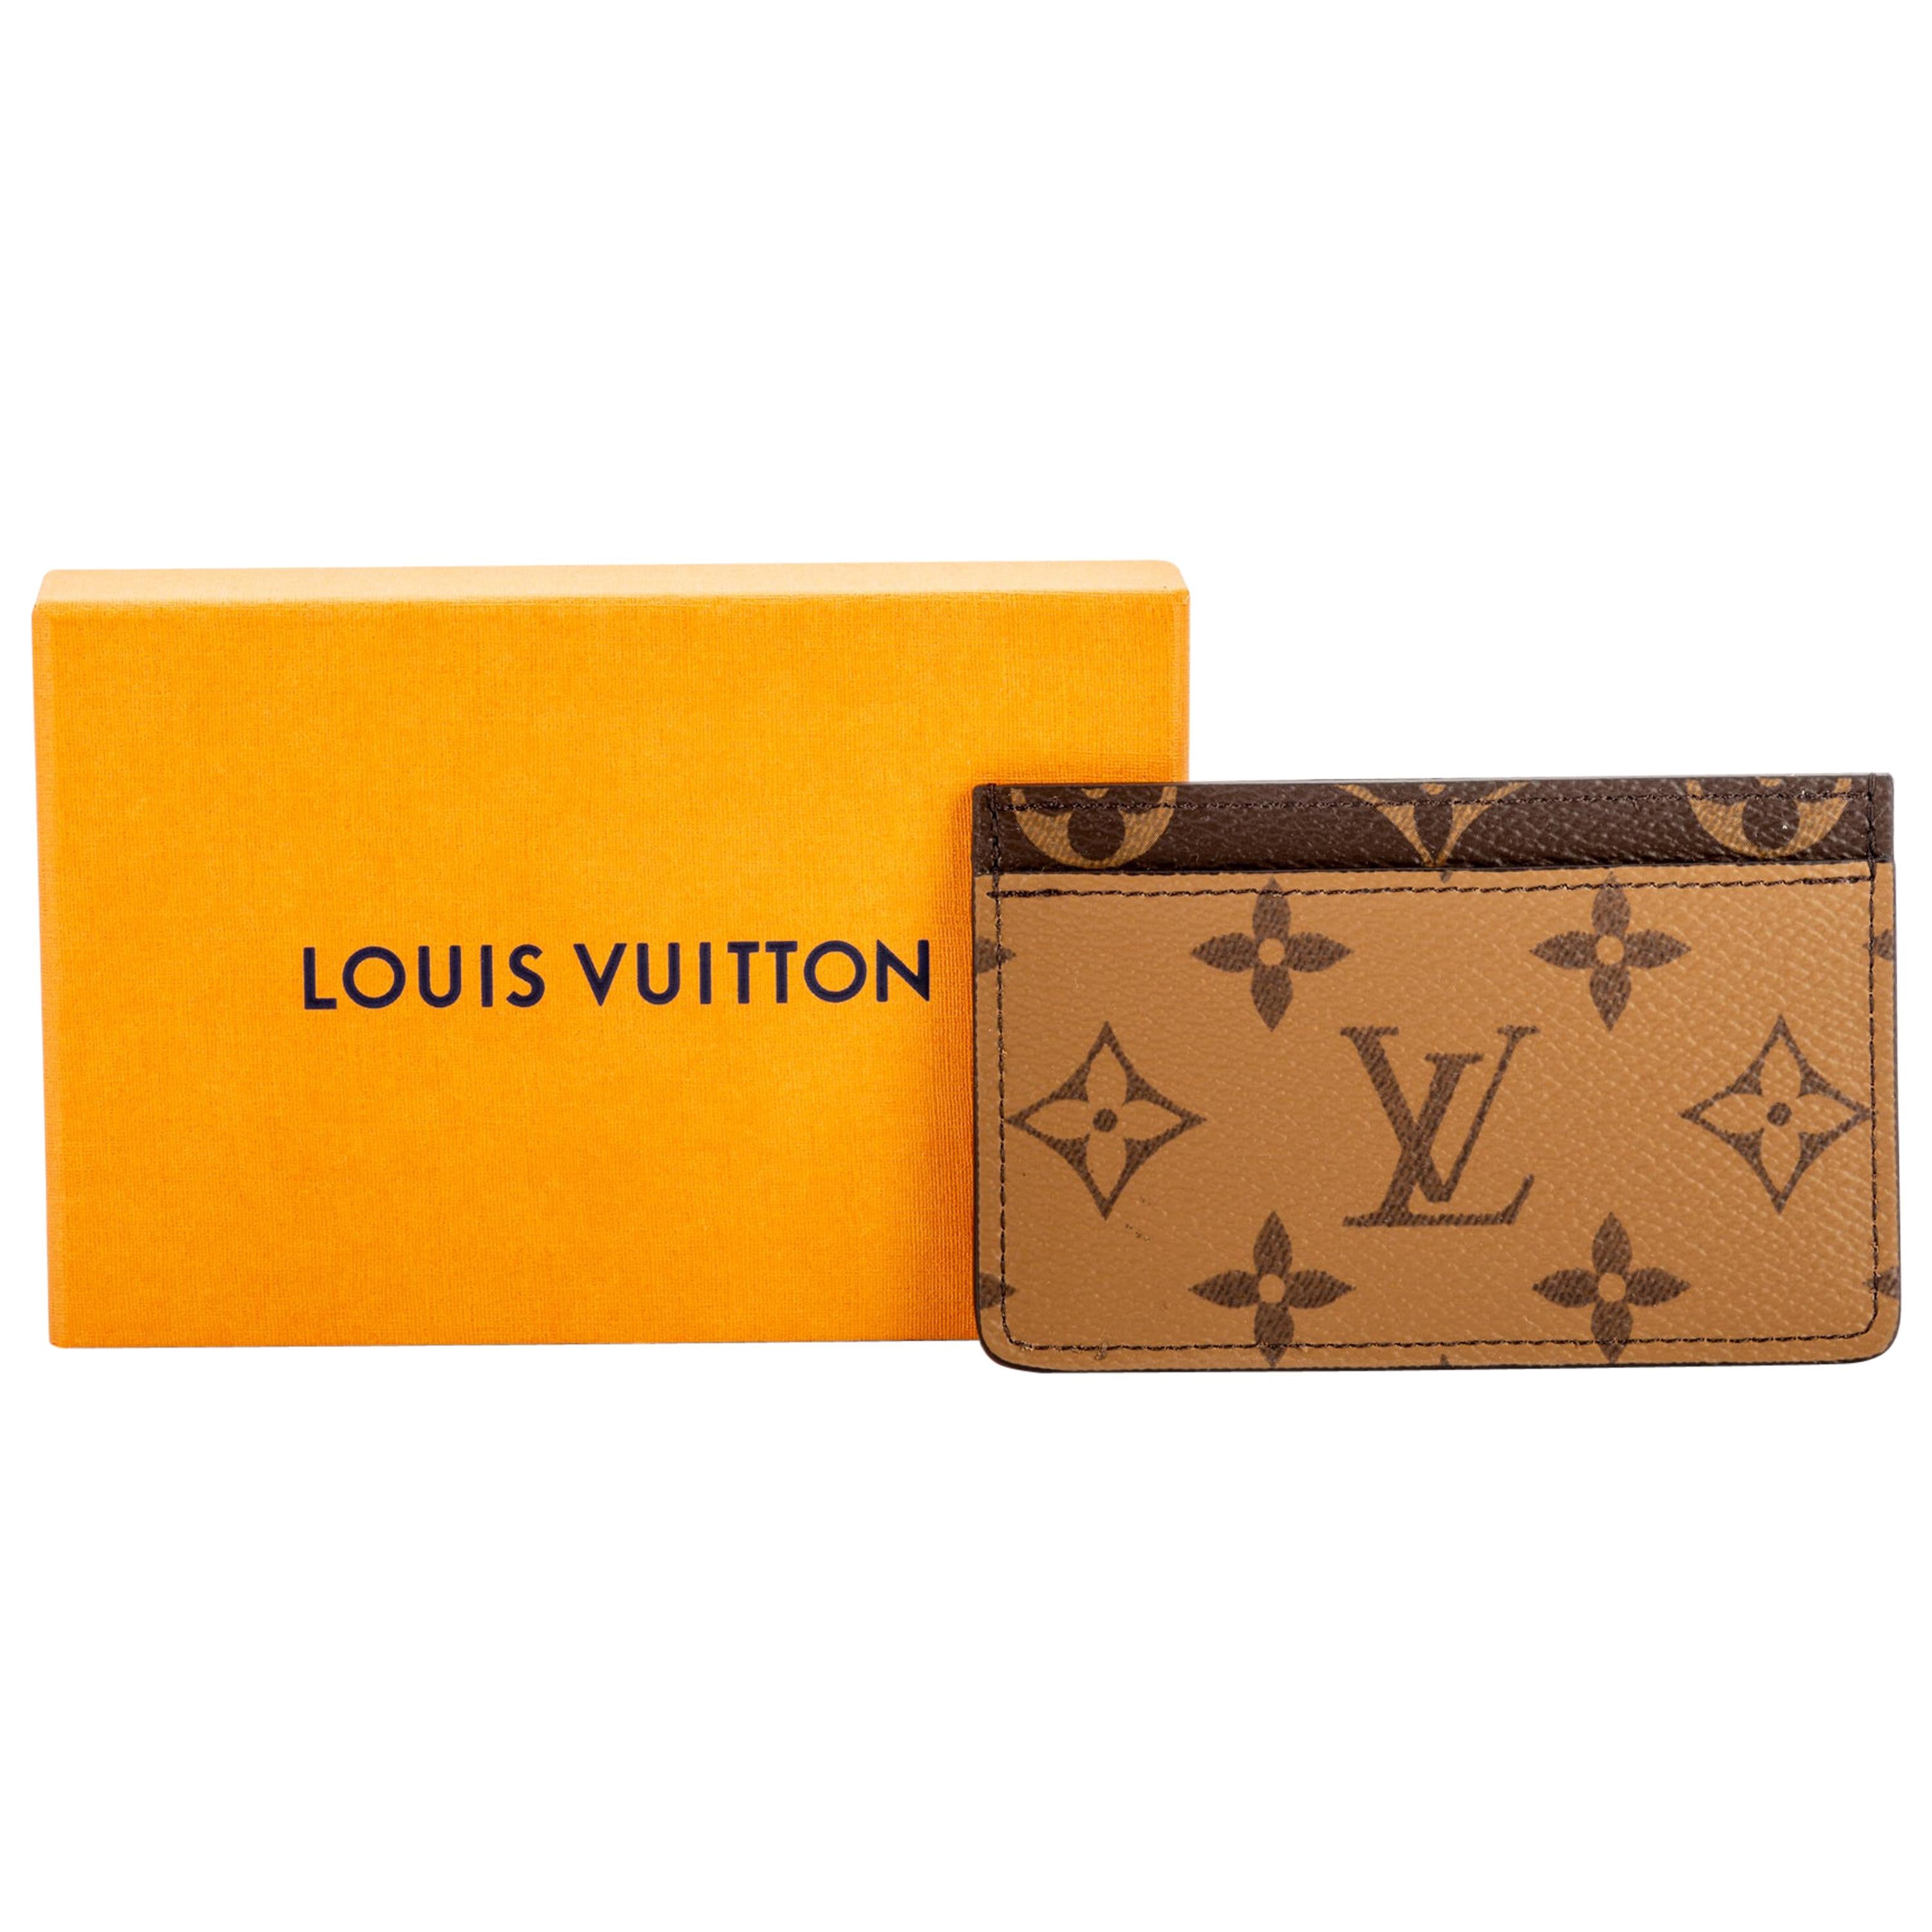 New in Box Louis Vuitton 2 Tone Credit Card Case 